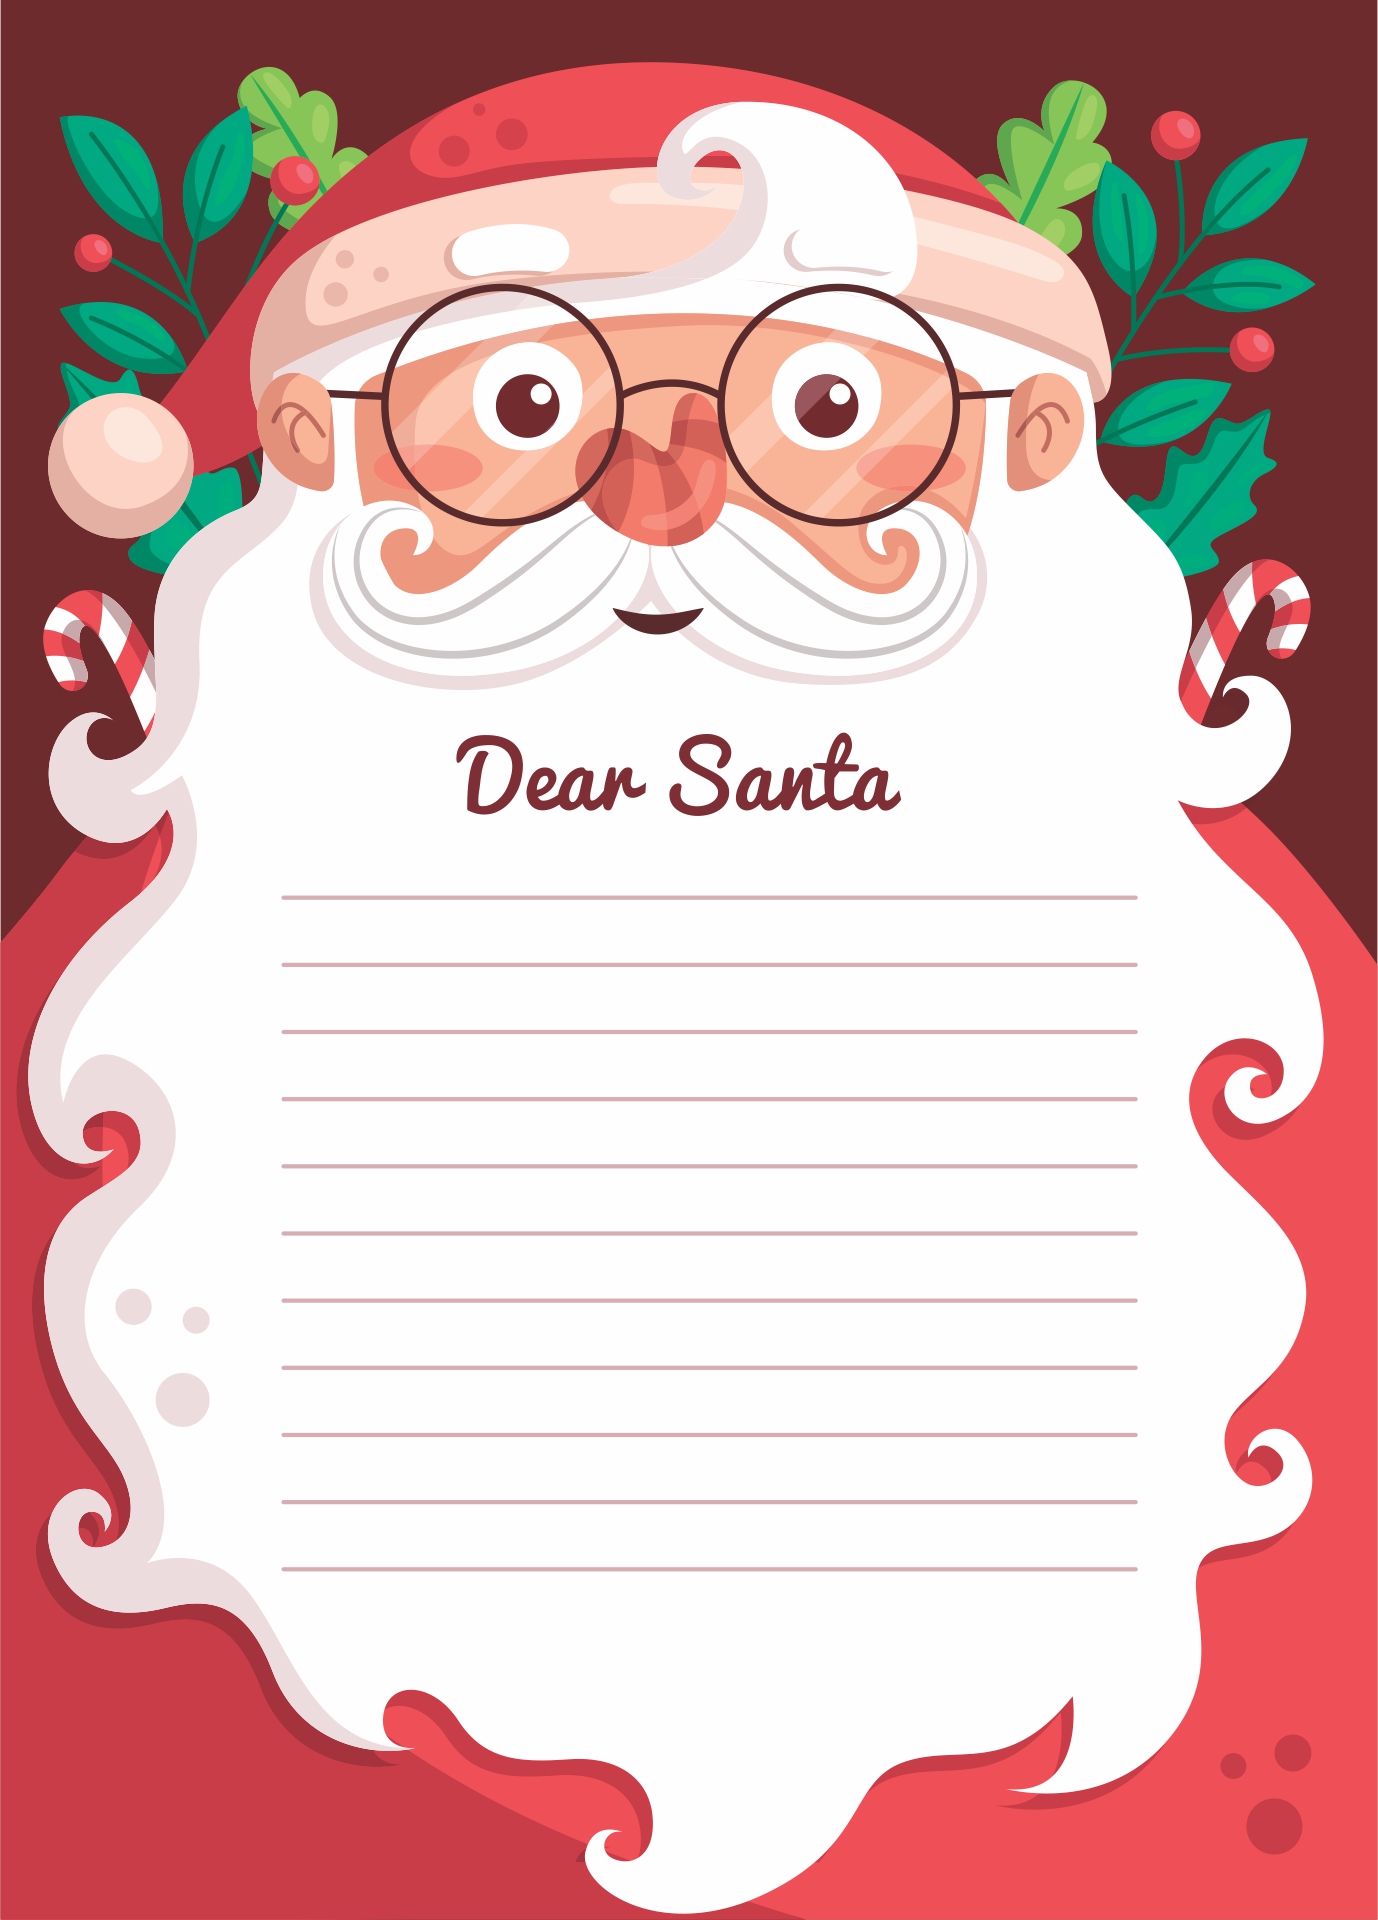 Printable Letters From Santa Claus